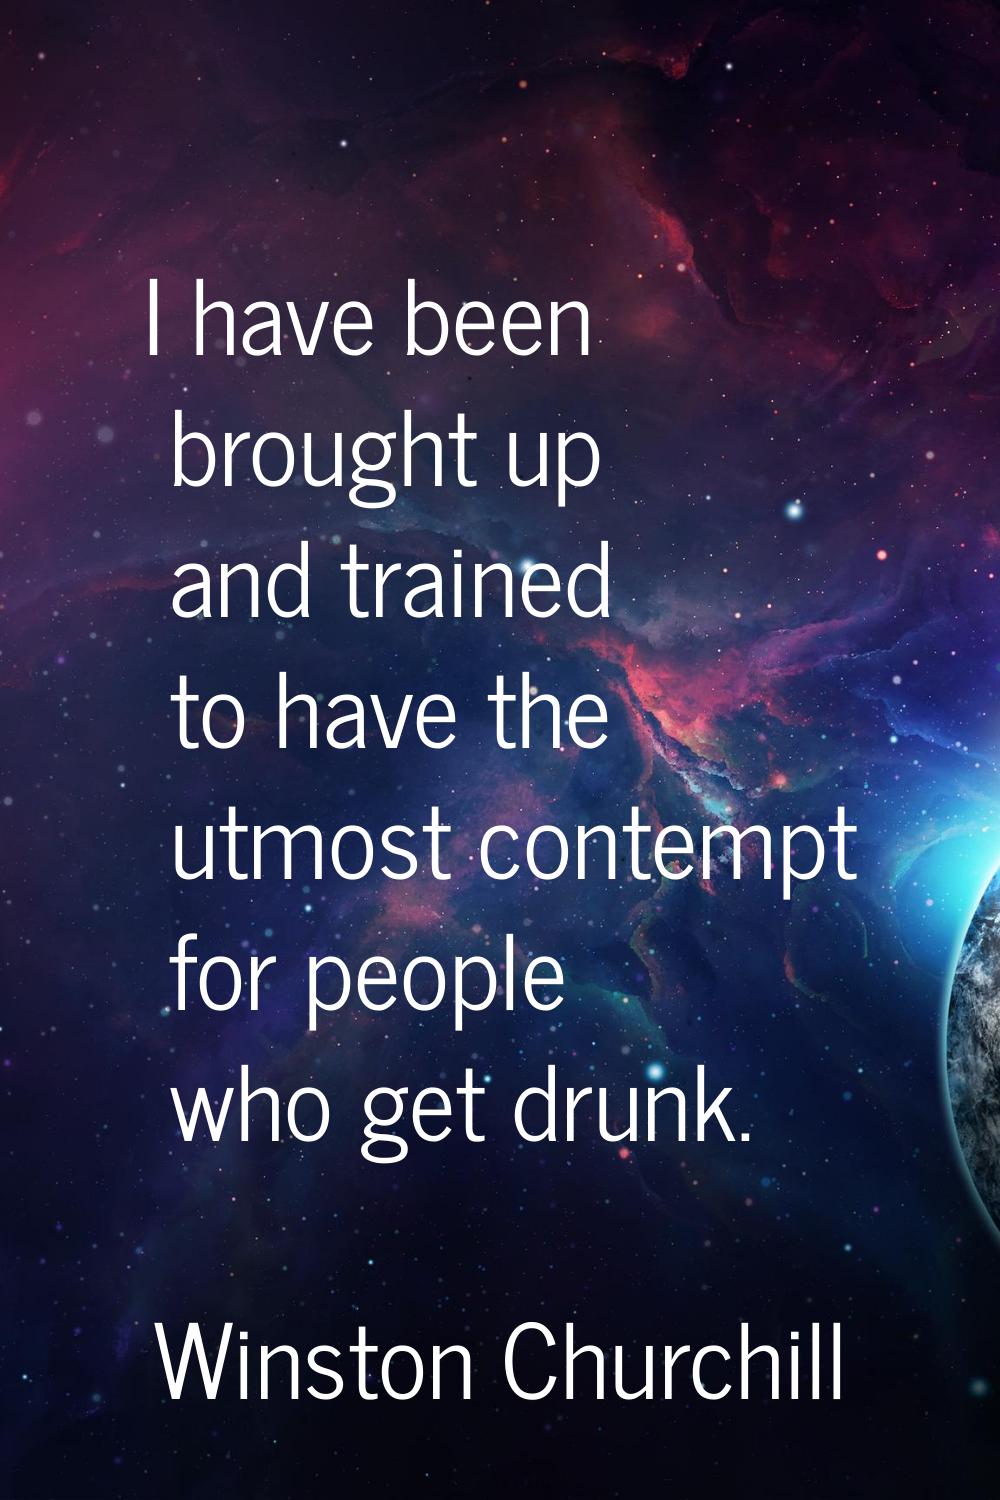 I have been brought up and trained to have the utmost contempt for people who get drunk.